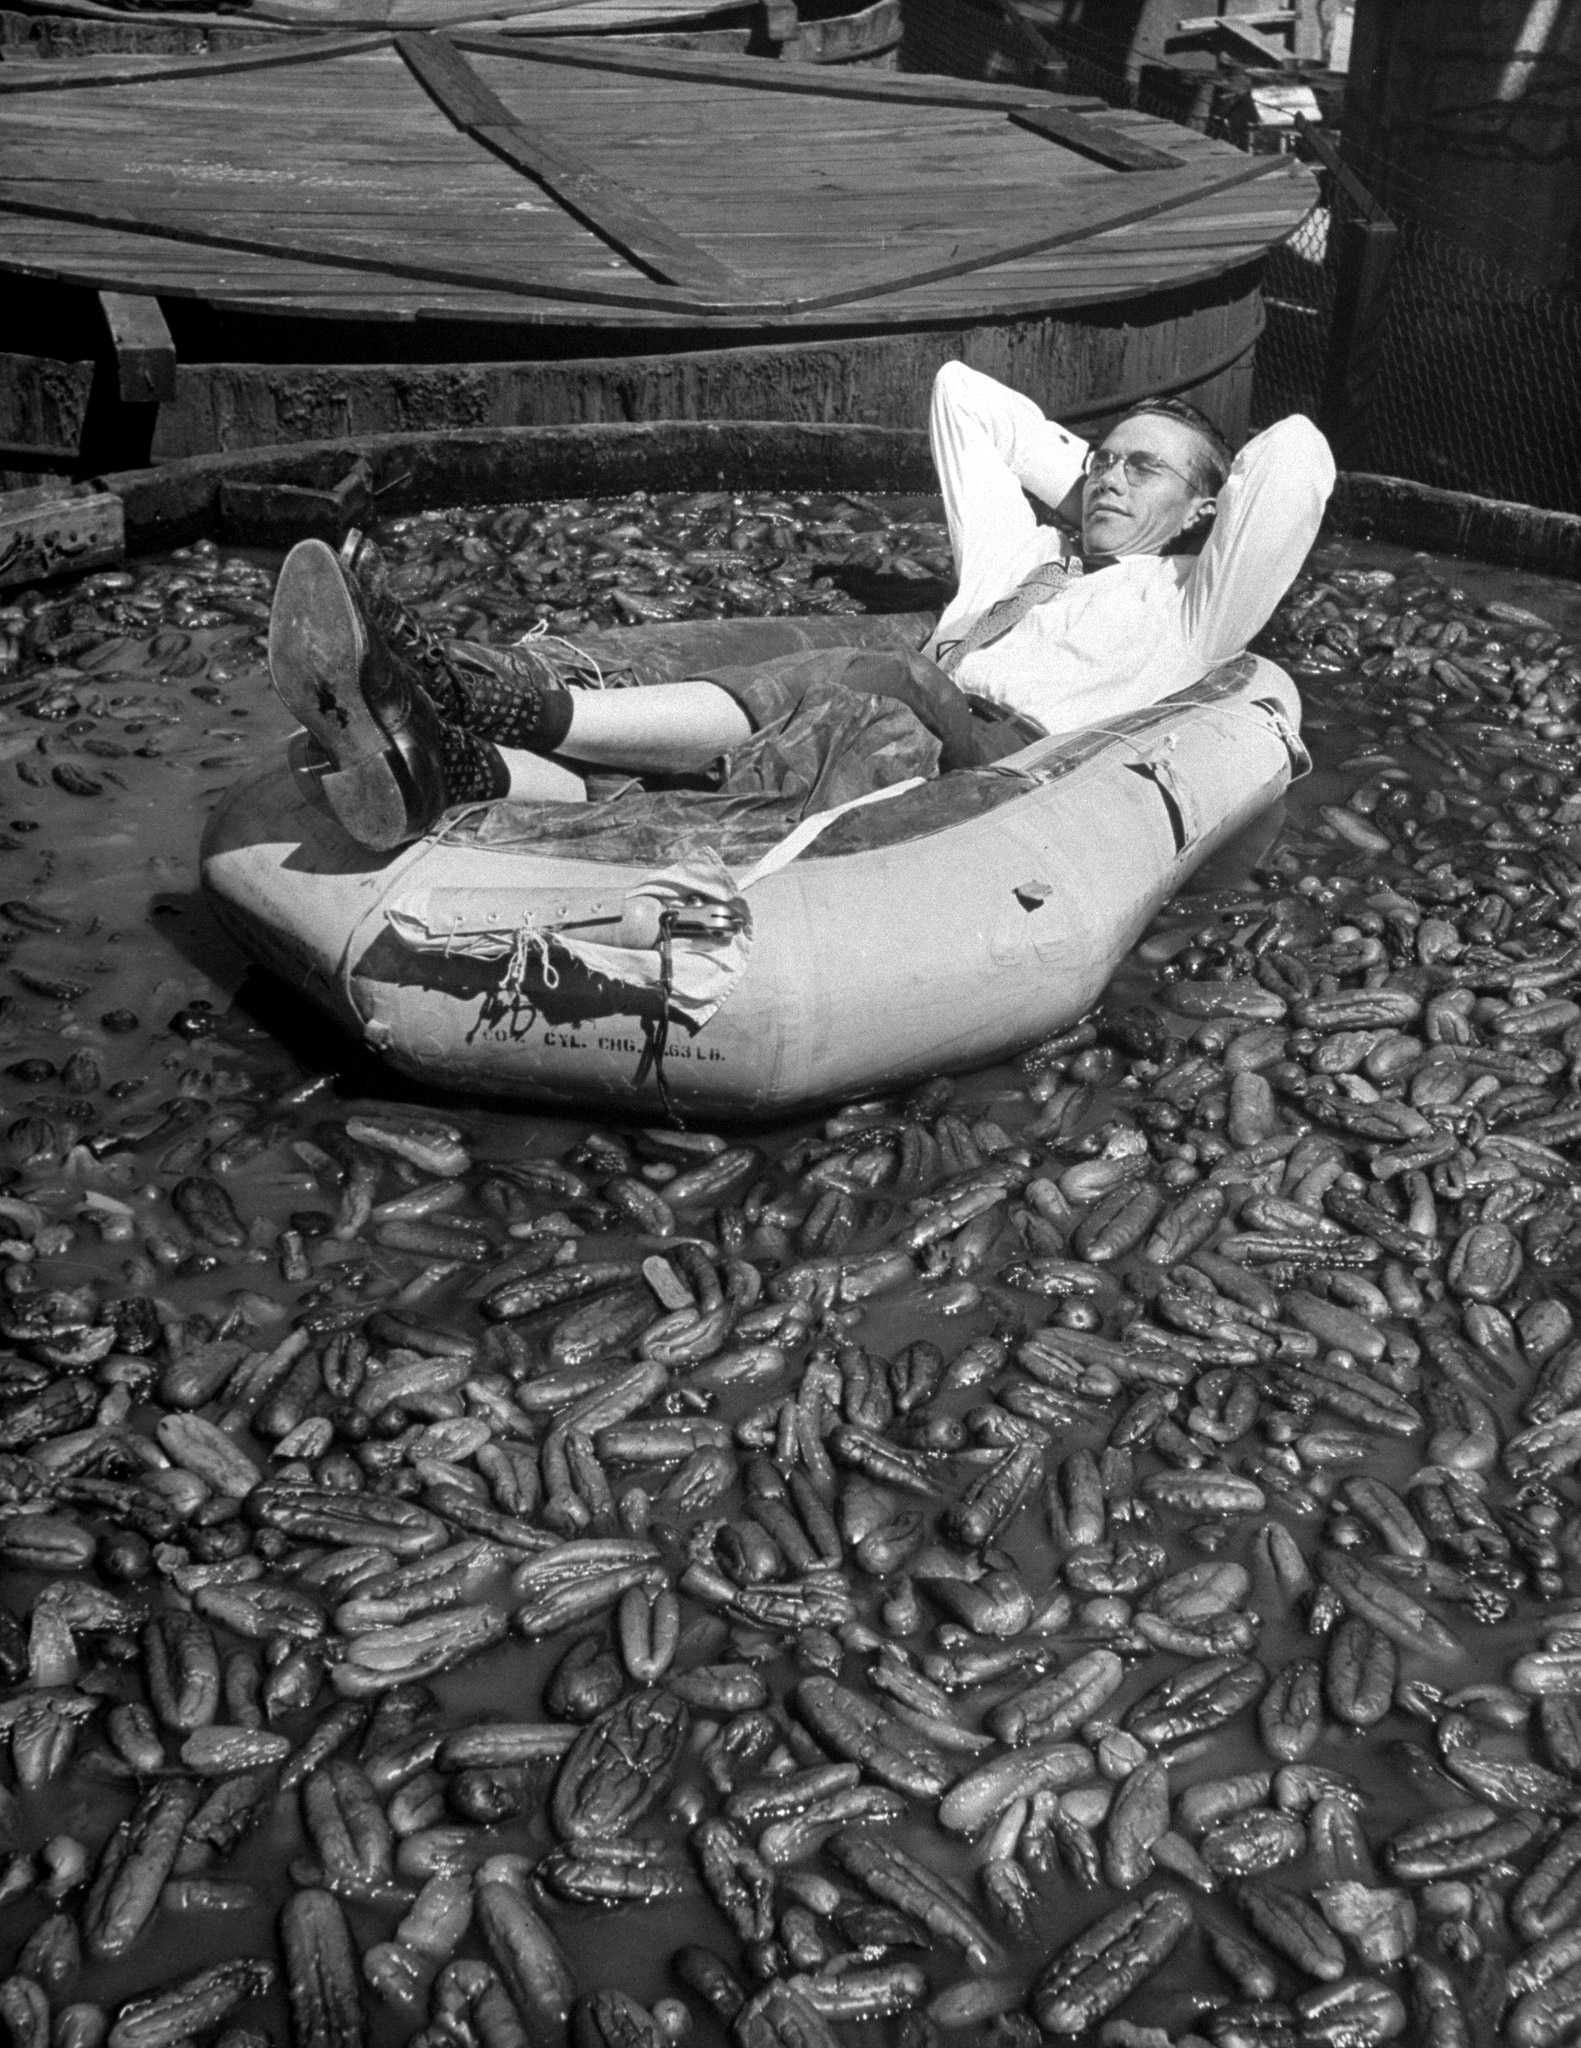 Mr. Dill Pickle of Mississippi reclines happily in a rubber boat amid 204,681 soggy pickles.